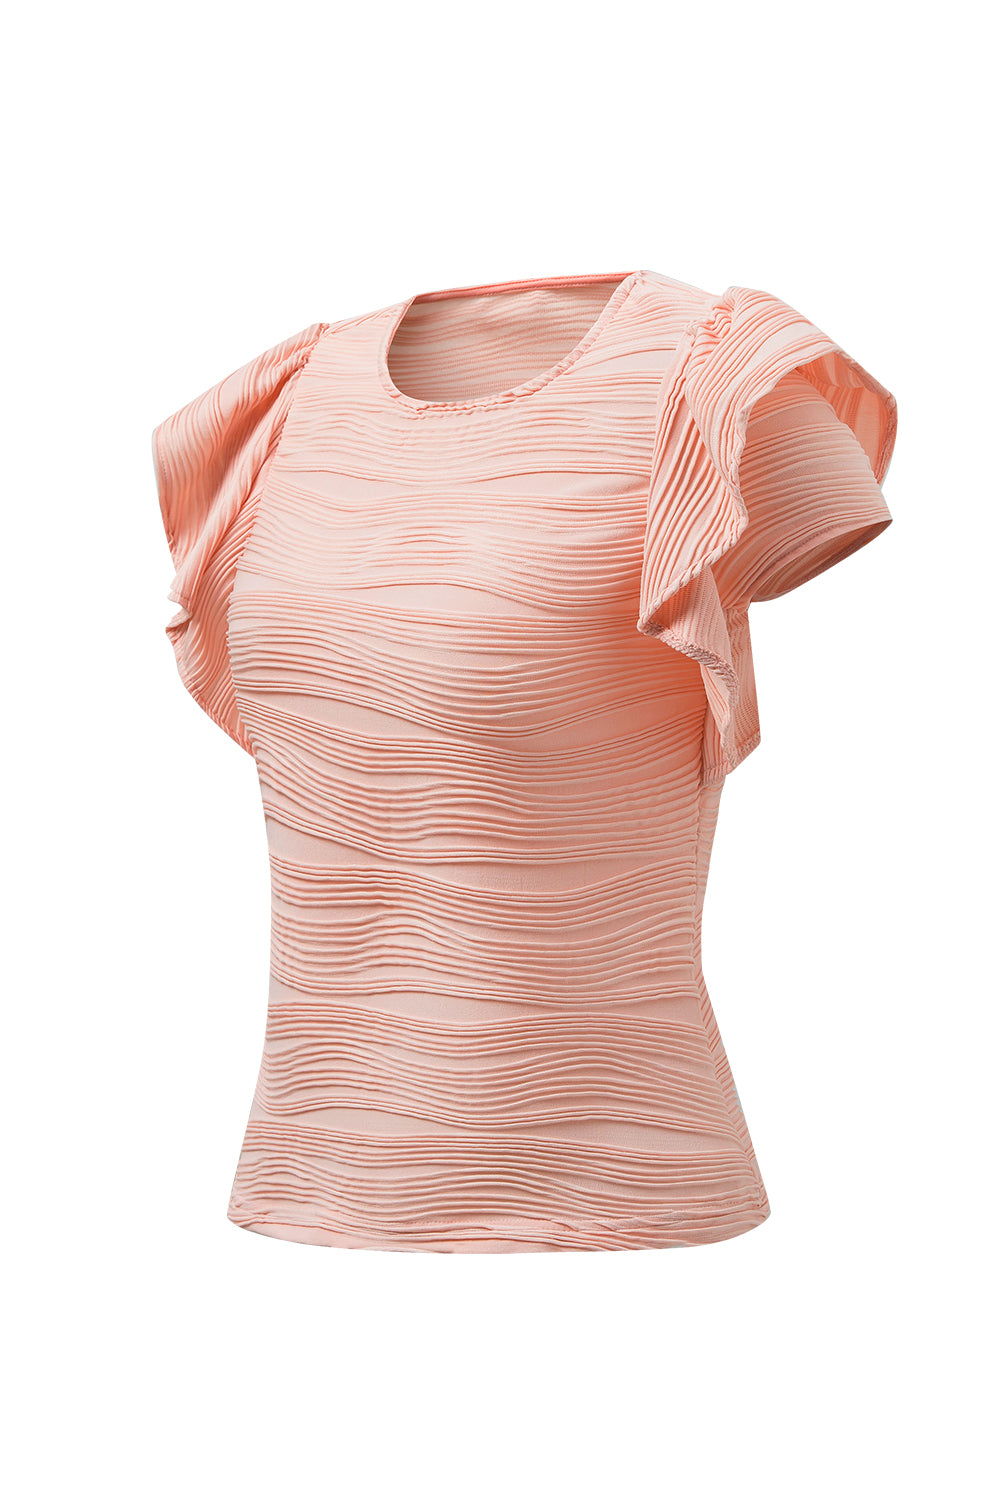 Apricot Pink Wavy Textured Ruffle Sleeve Top